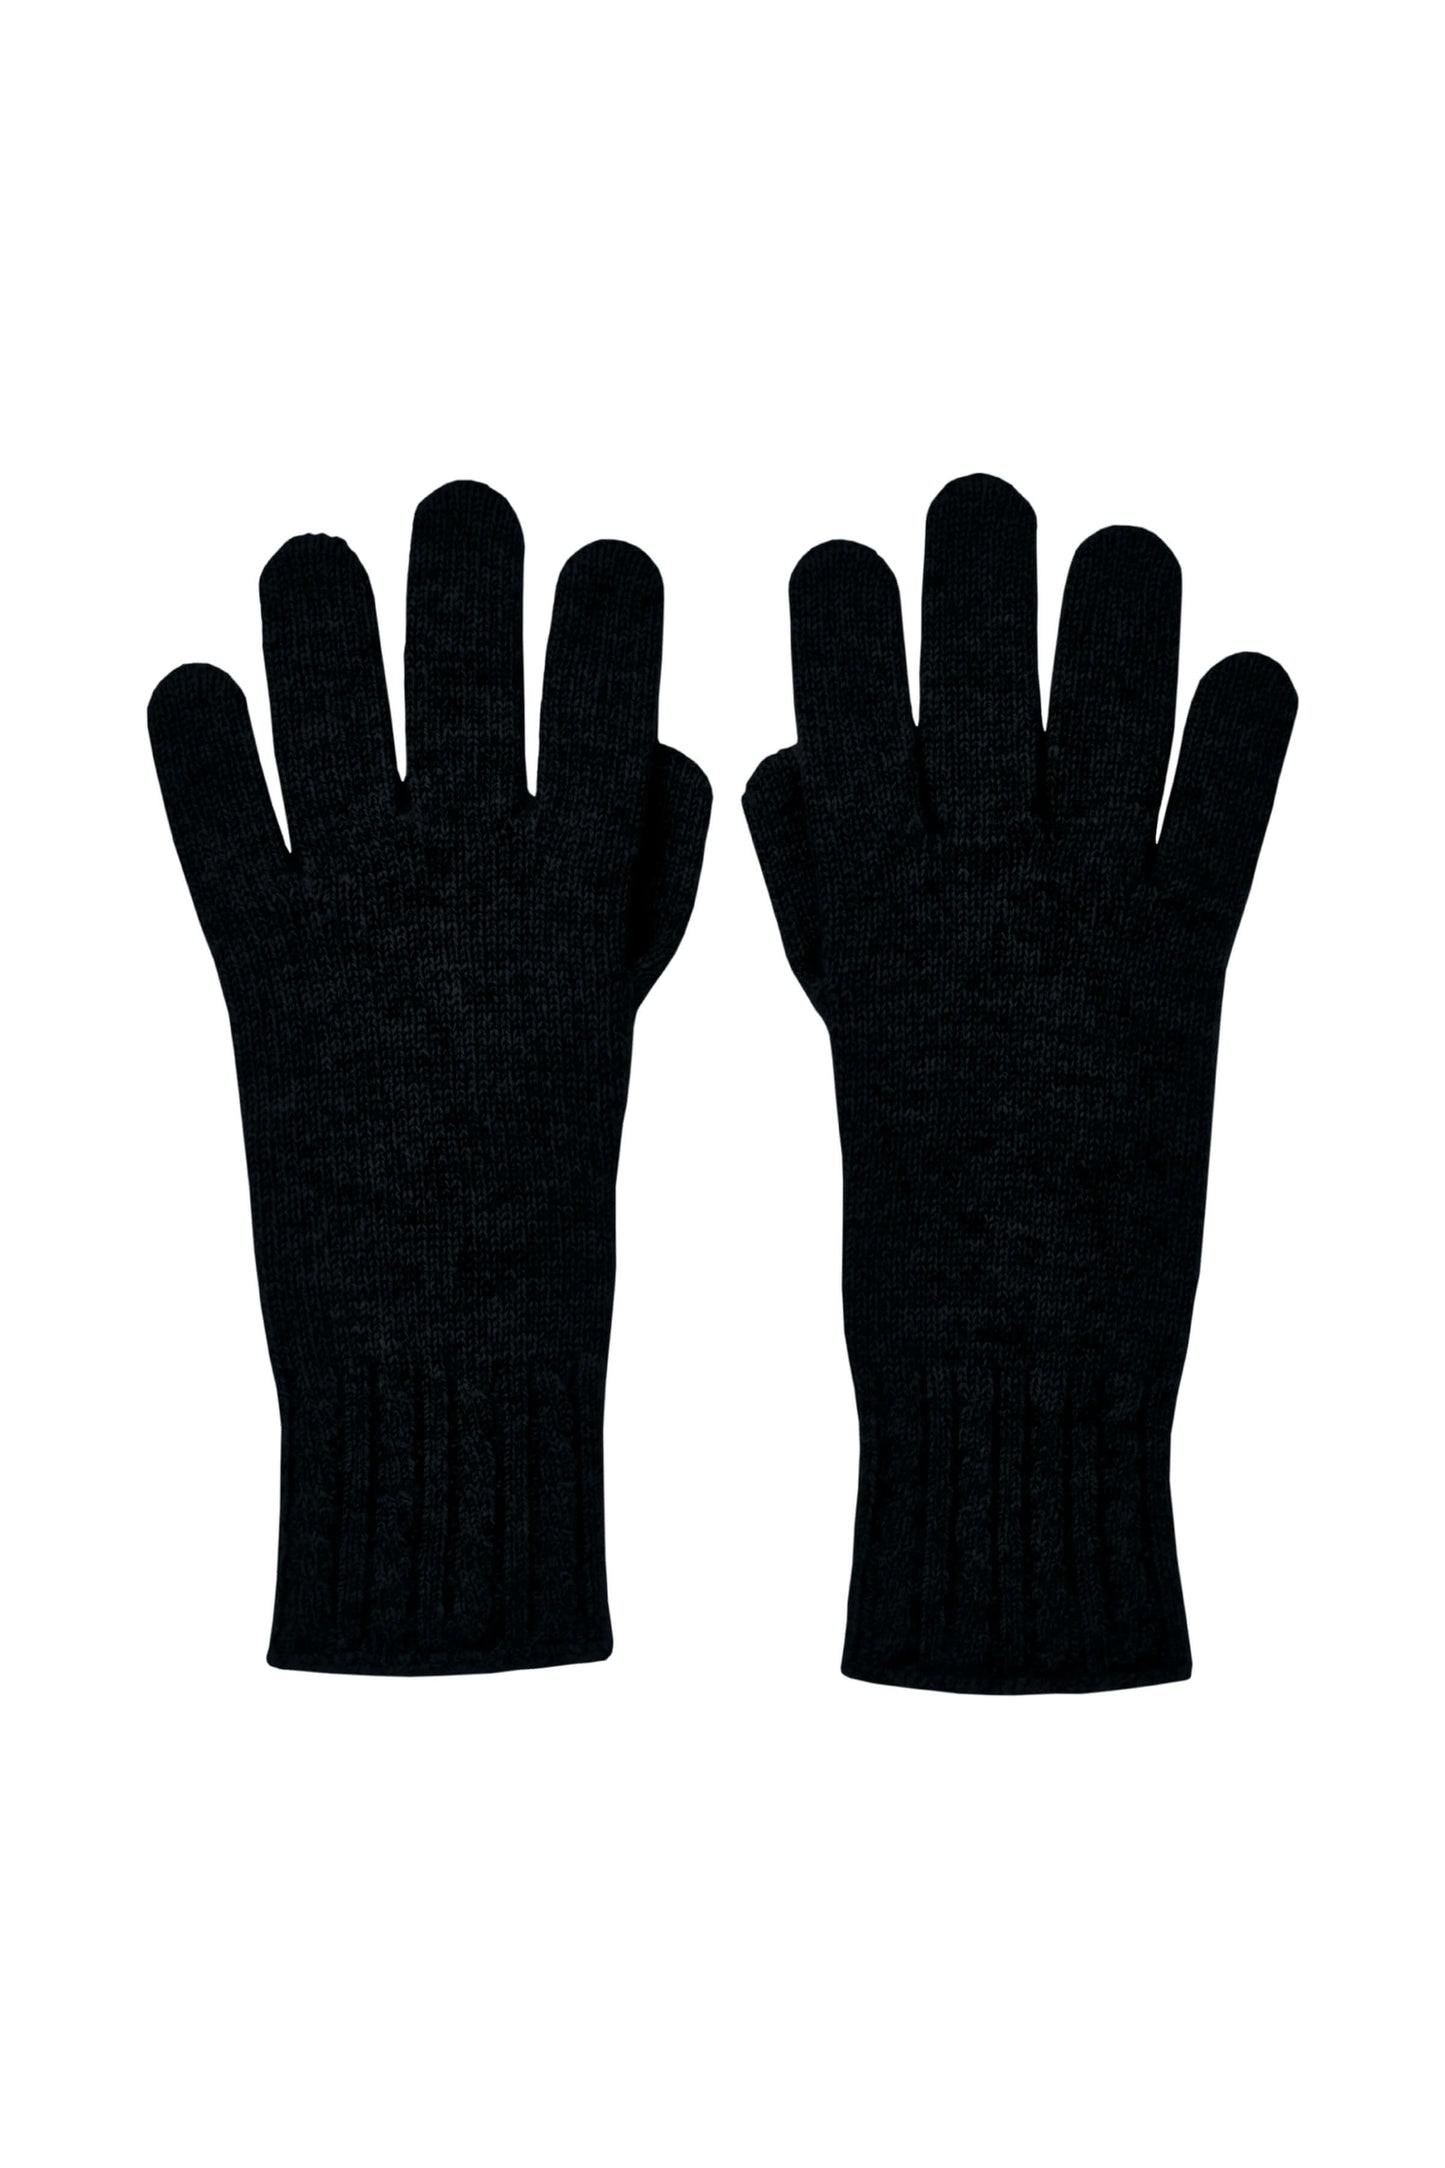 Johnstons of Elgin’s Black Women's Cashmere Gloves with Cable Cuff on a white background HAE03245SA0900